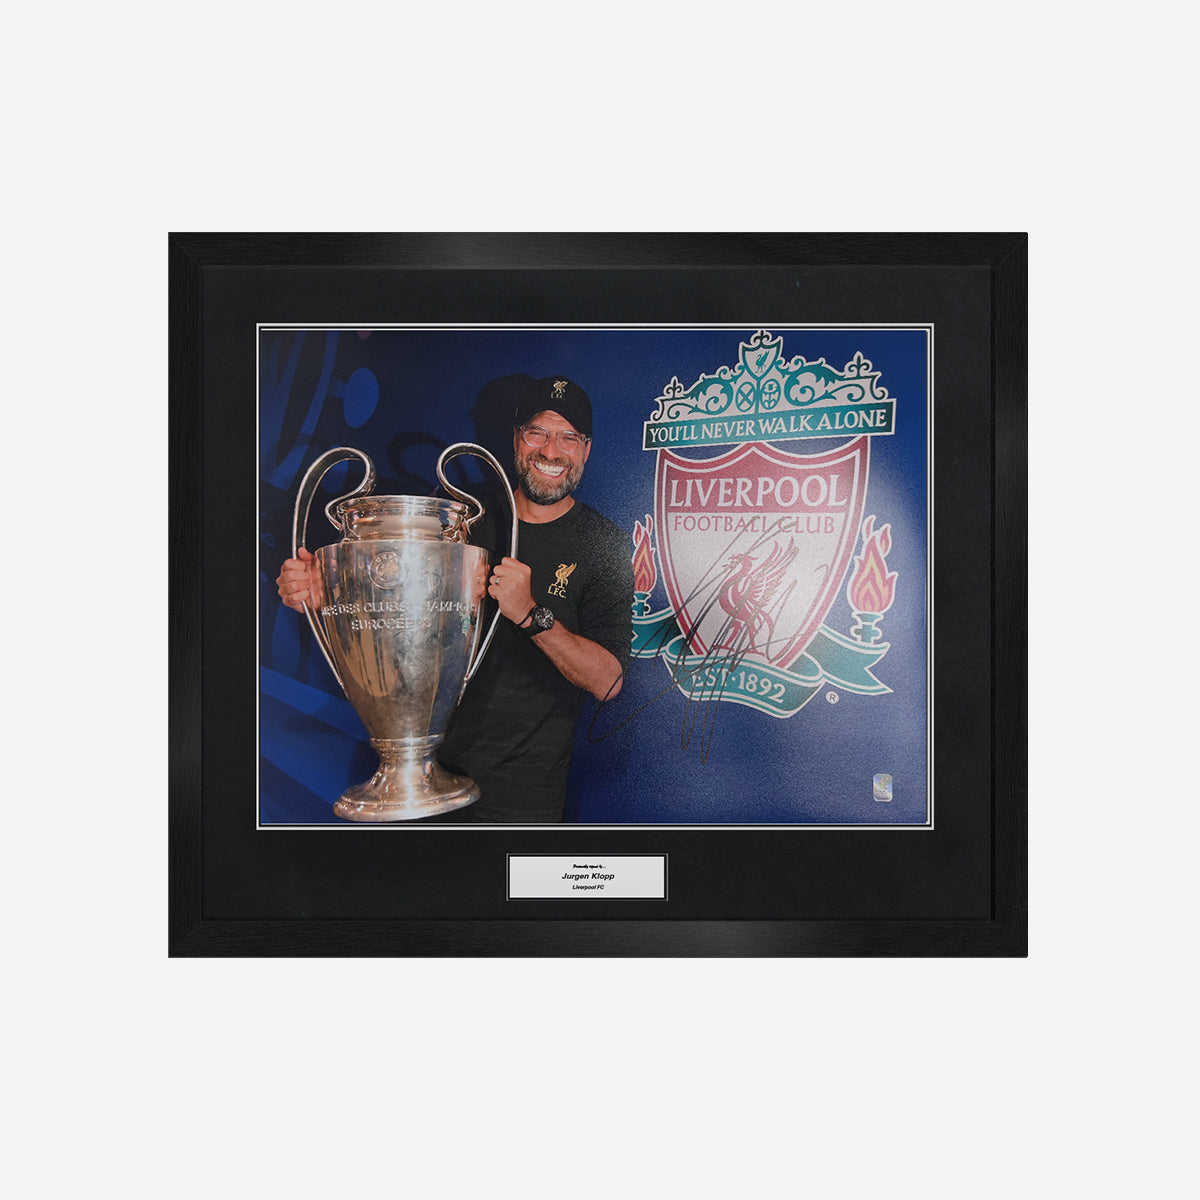 Jurgen Klopp Signed Liverpool FC Image - Champions League Trophy With The Iconic LFC Crest